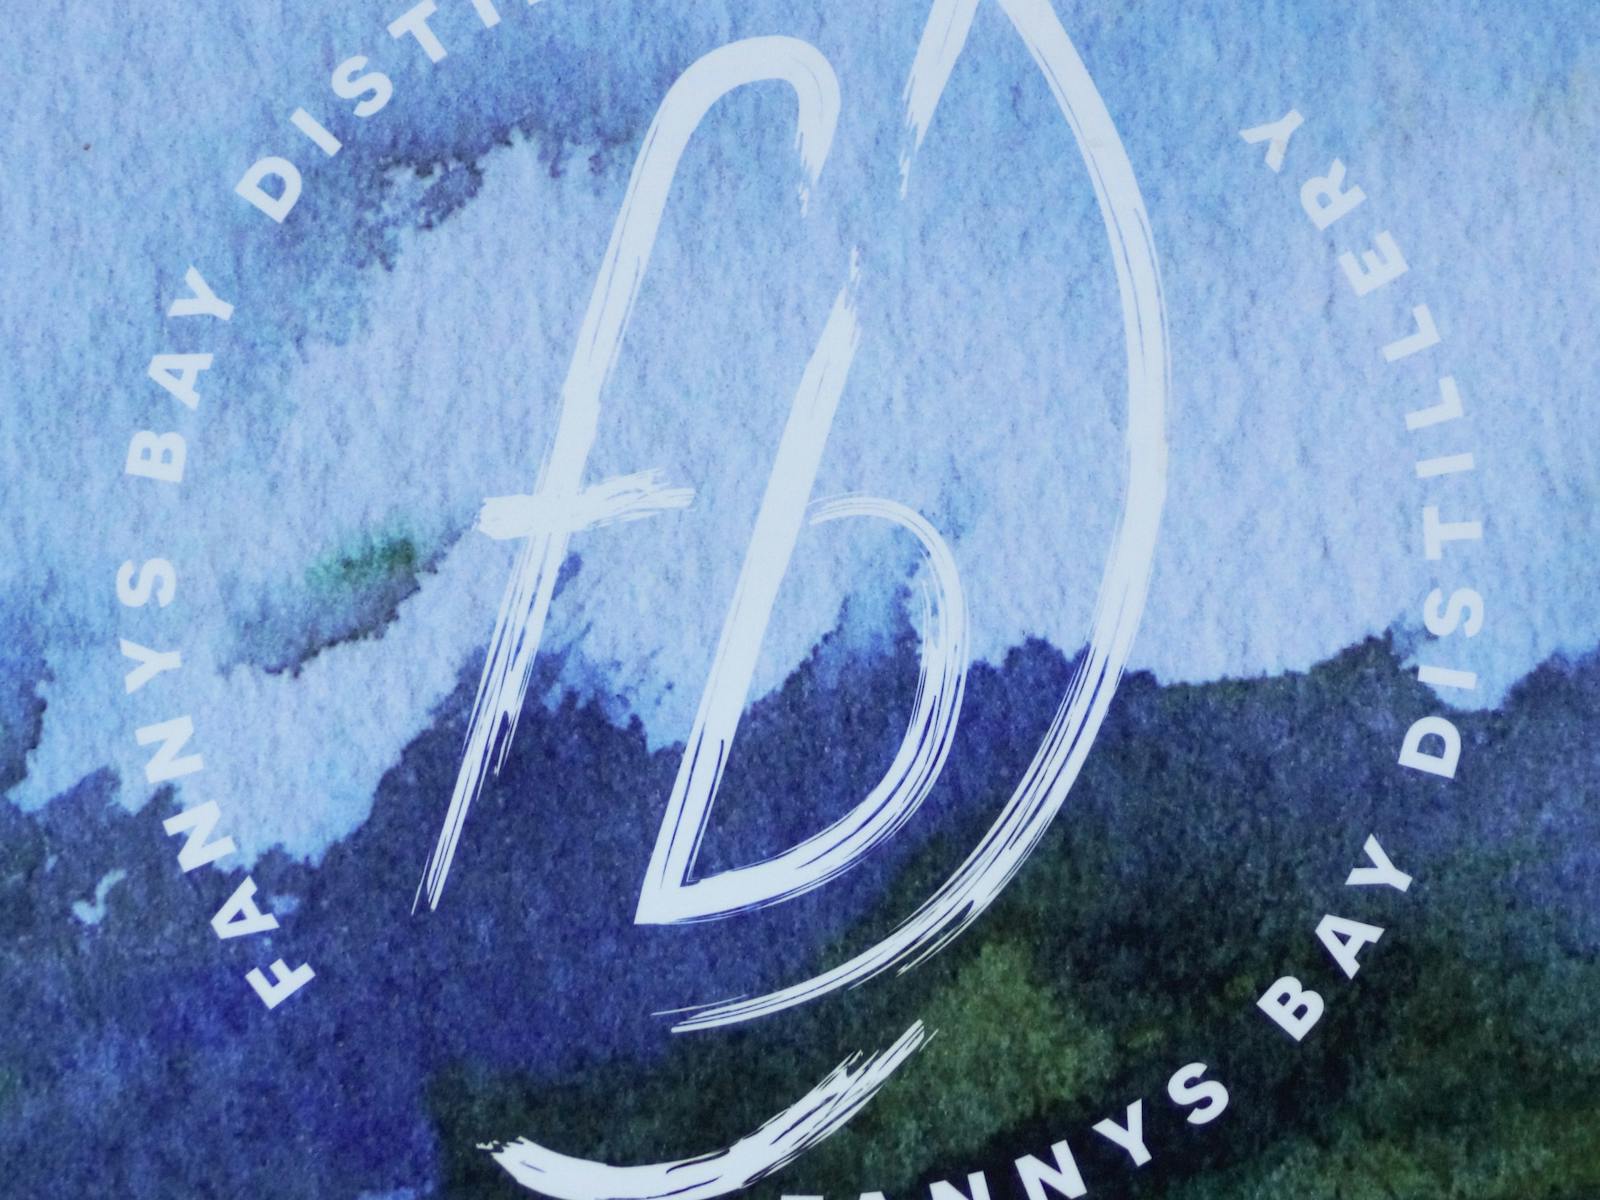 Signage for Fannys Bay Distillery